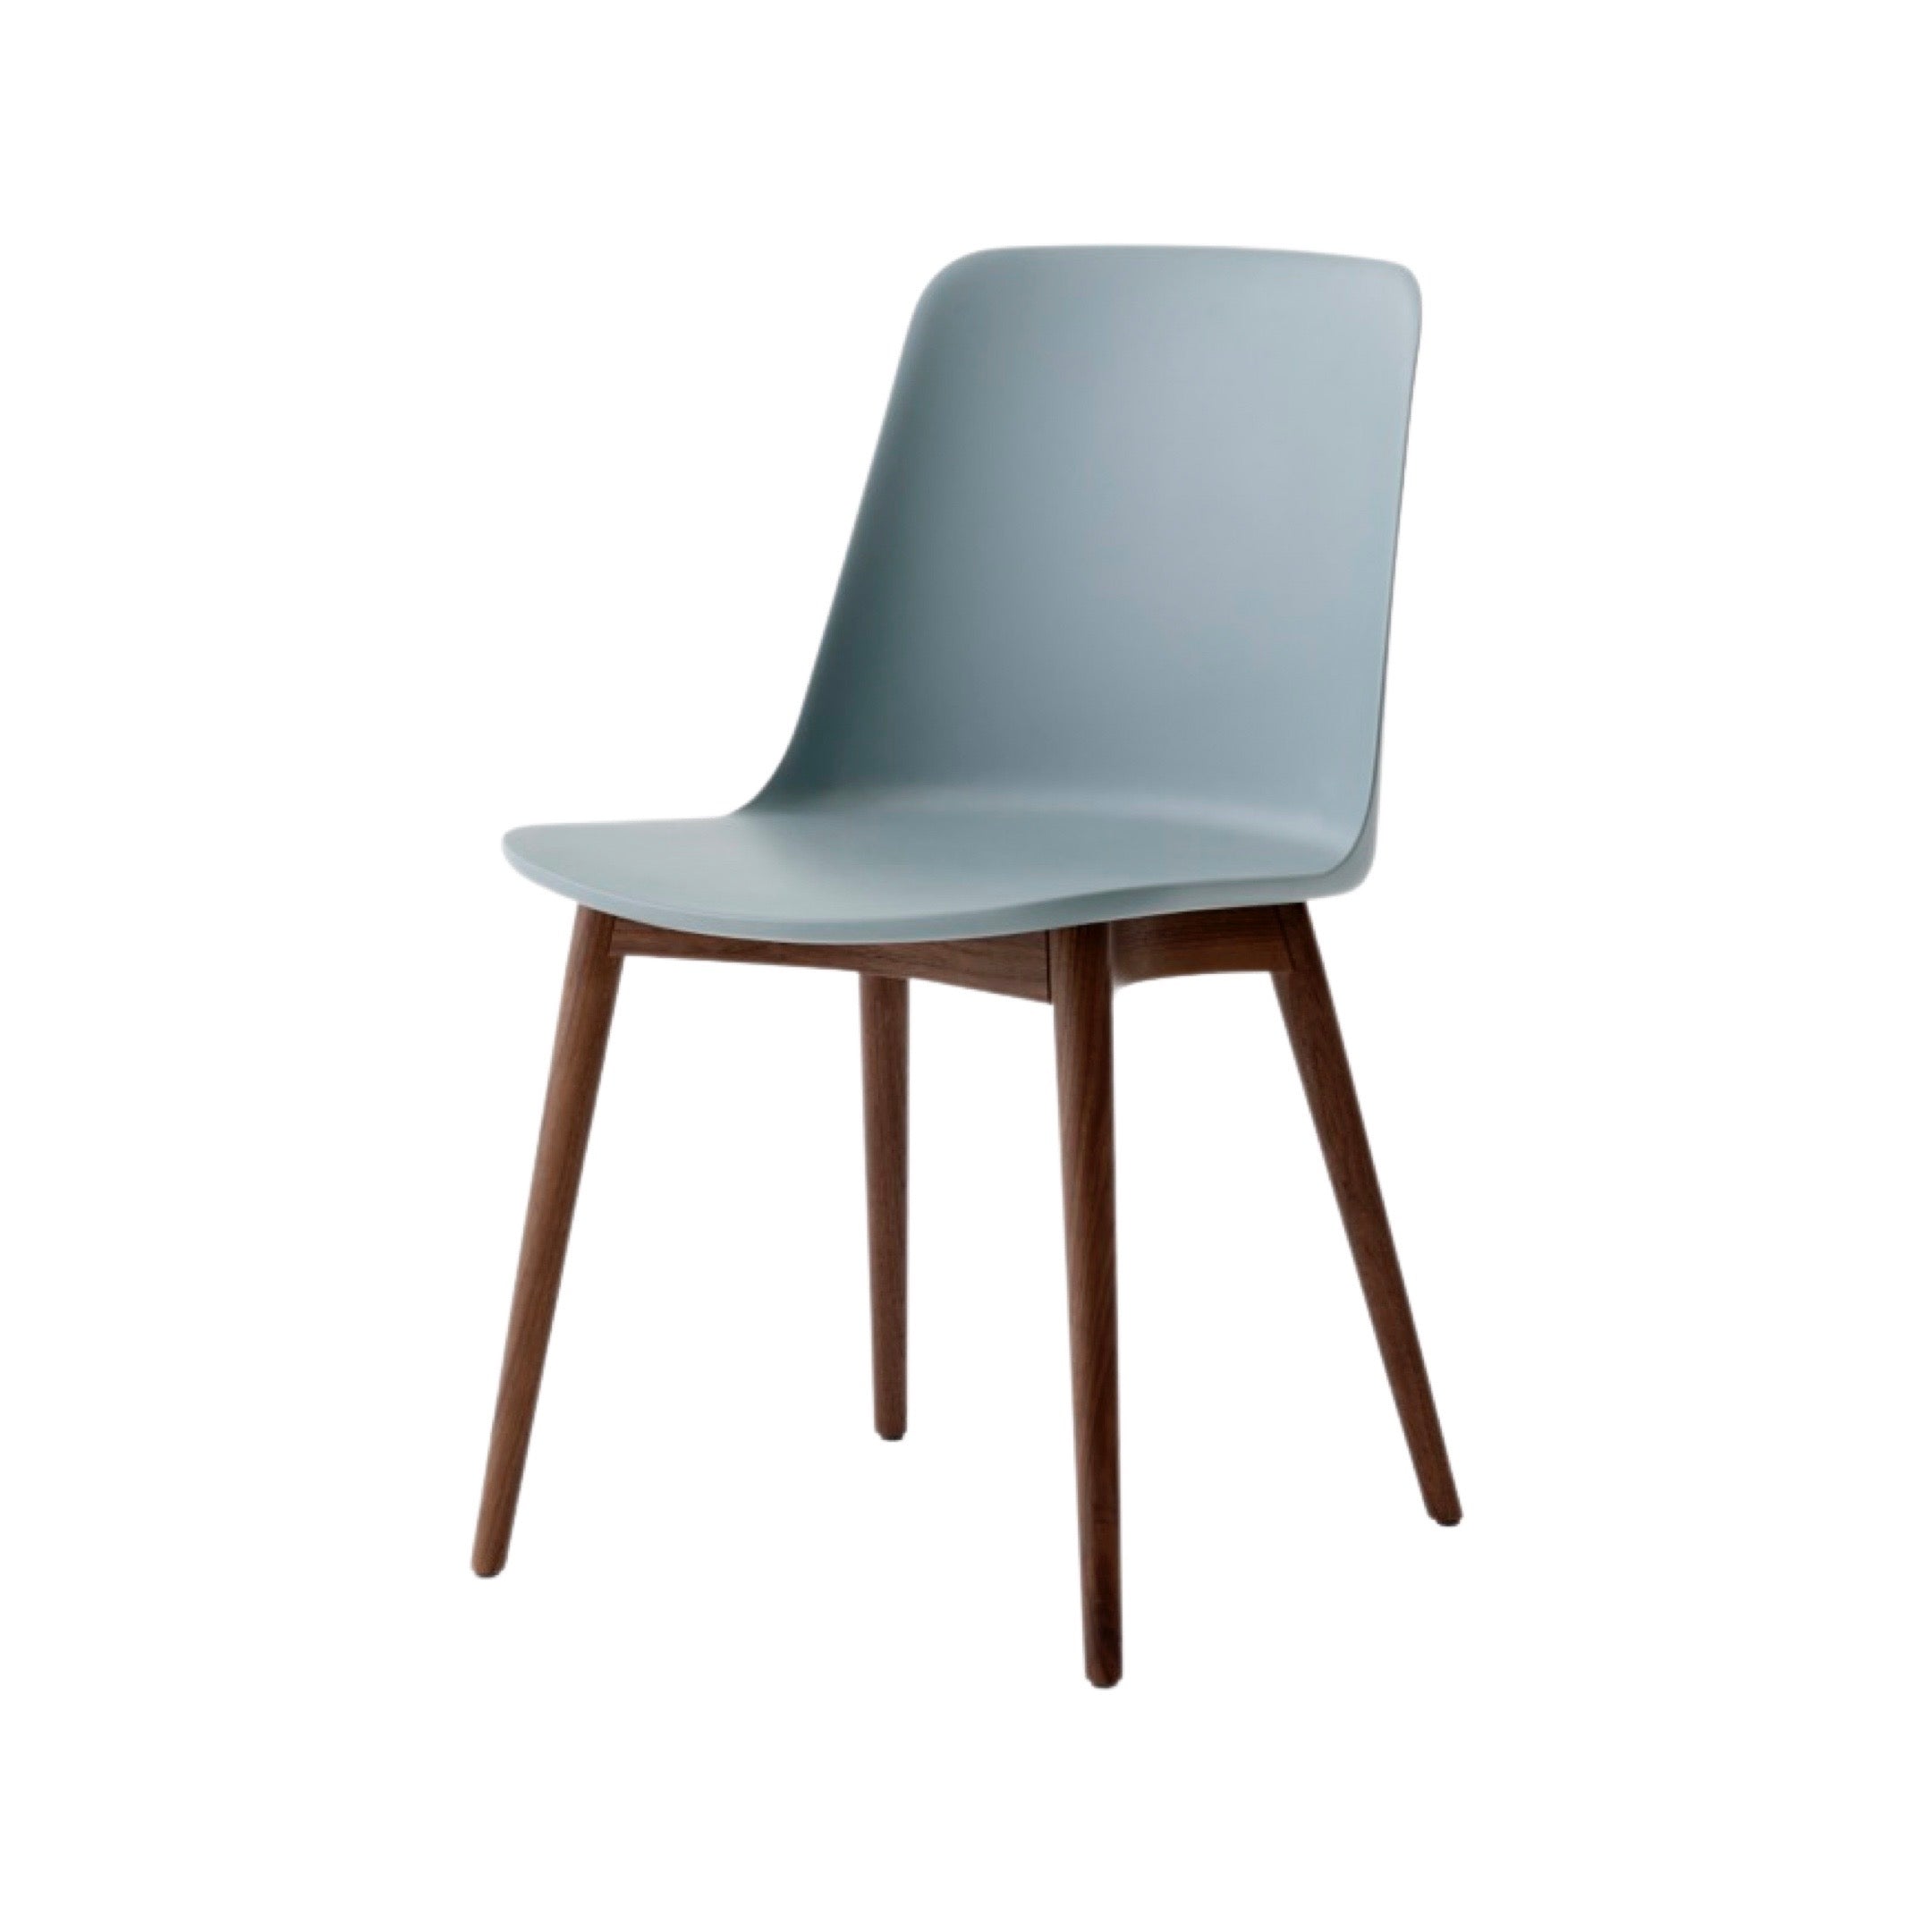 &Tradition Rely Chair - HW71